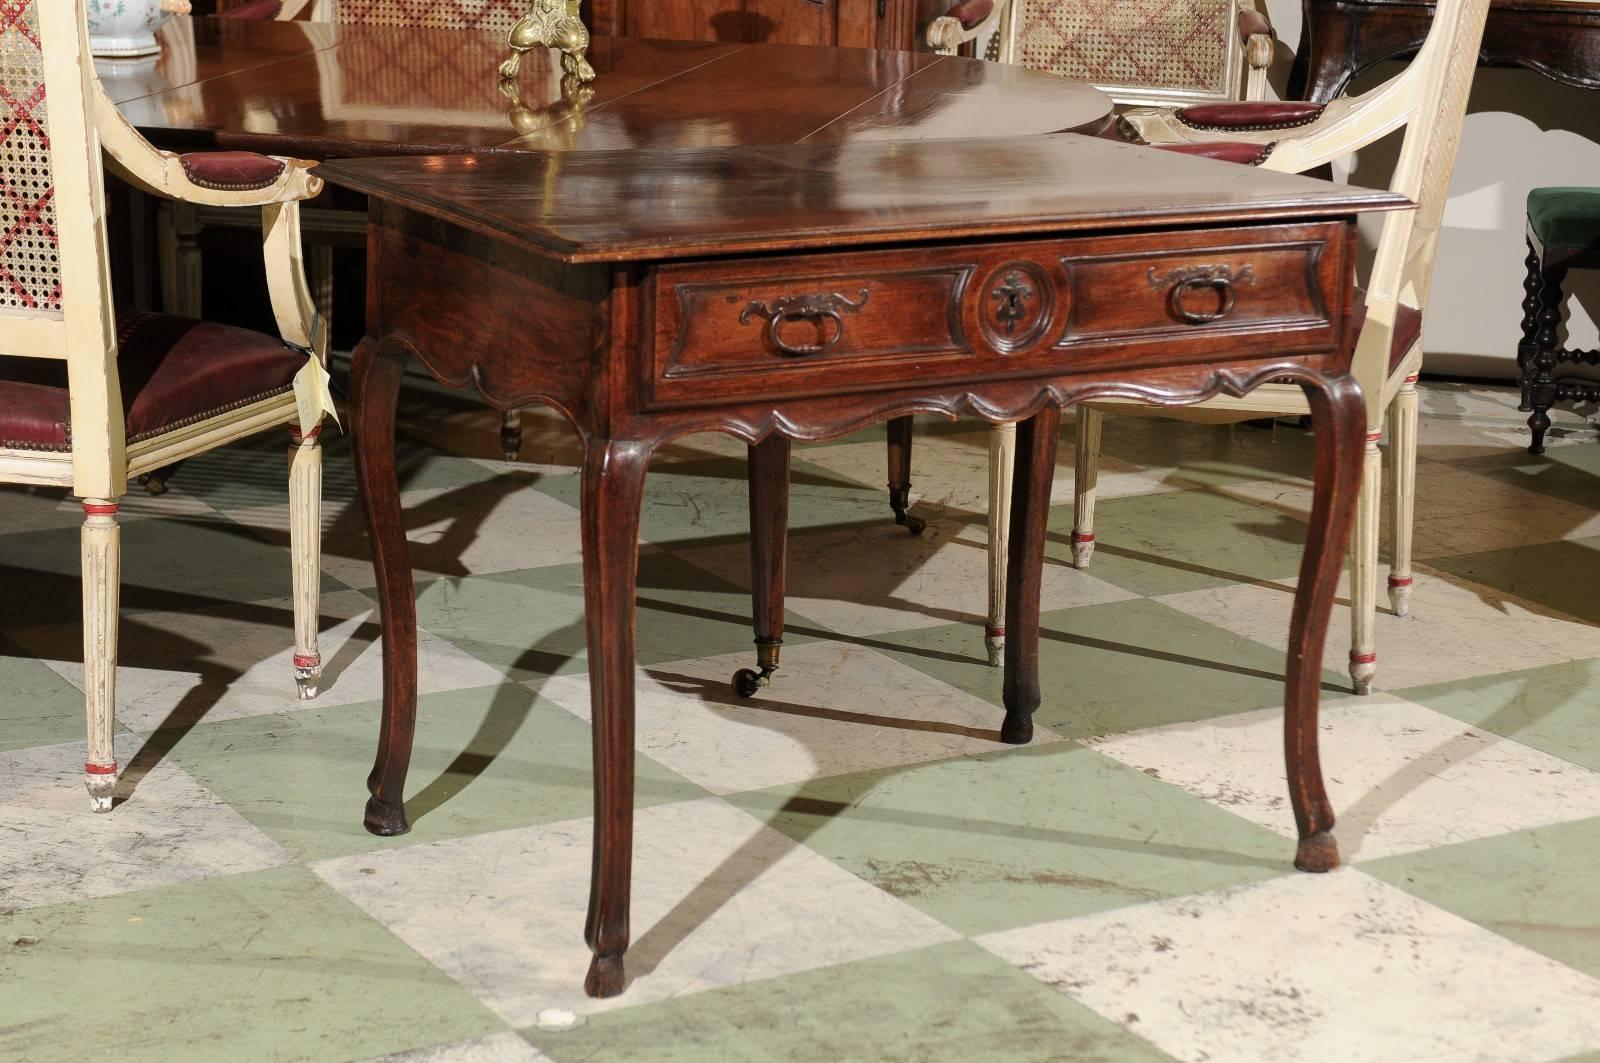 18th century French Louis XV side table in walnut with hoof feet and drawer, circa 1760.